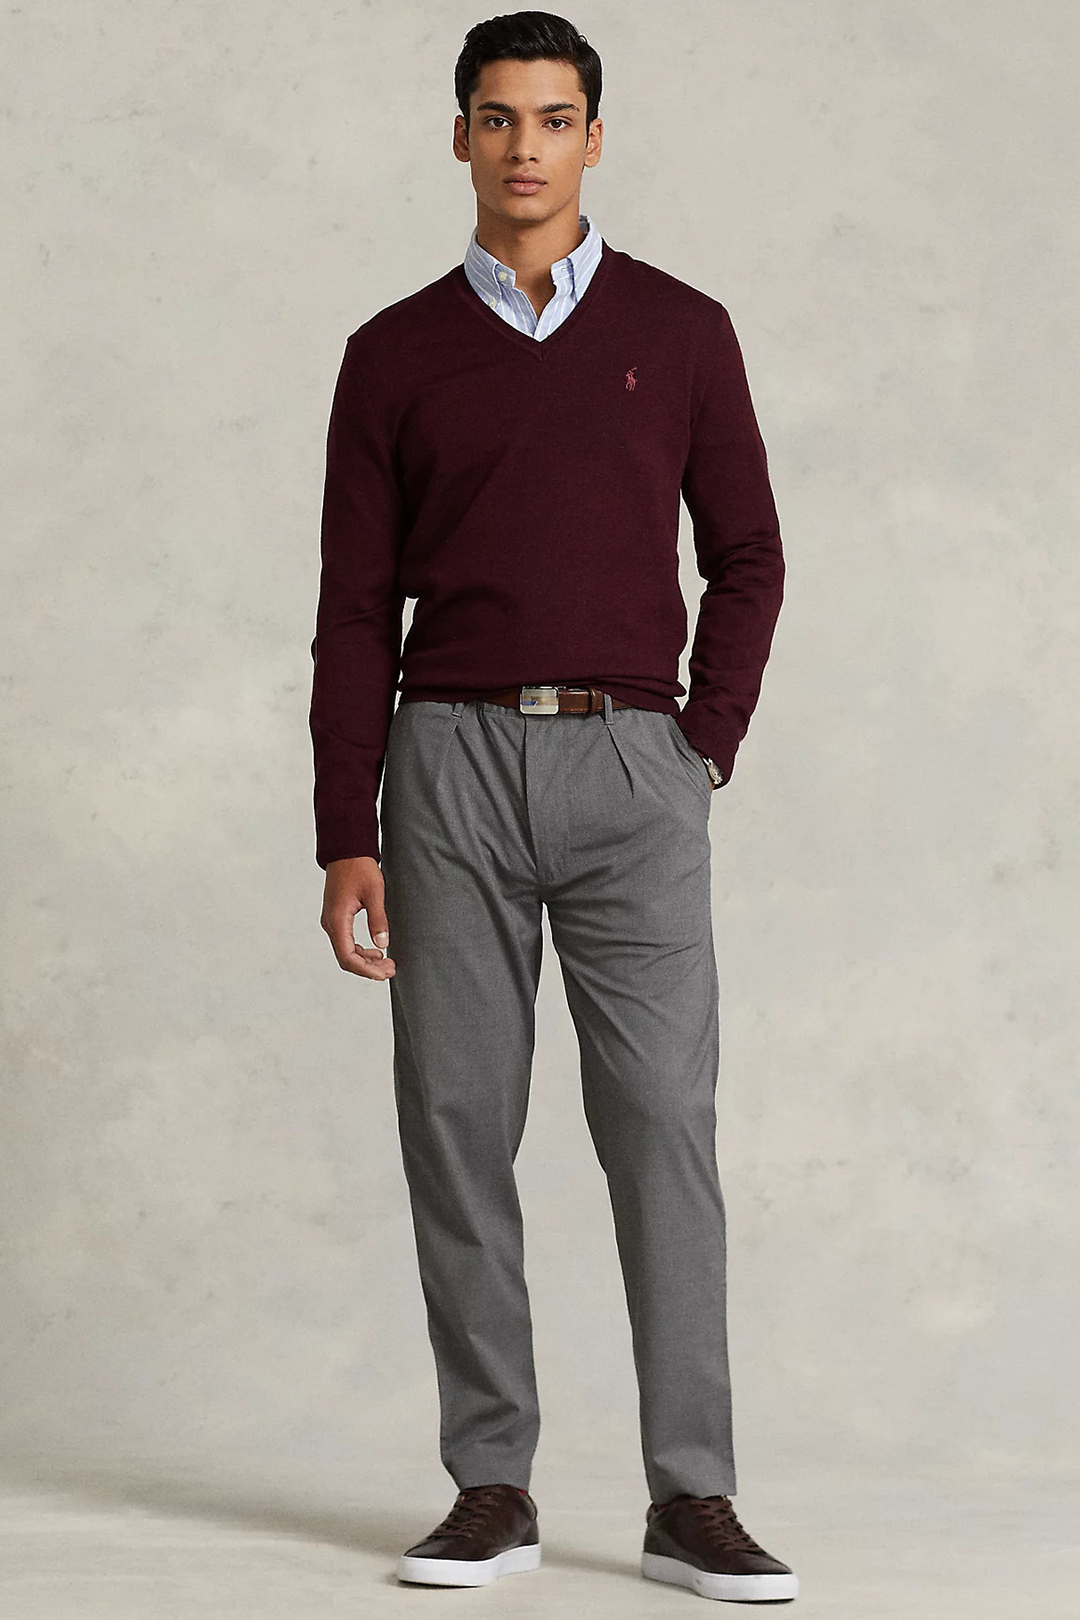 Burgundy v-neck sweater, light blue striped dress shirt, charcoal chinos, and dark brown sneakers outfit